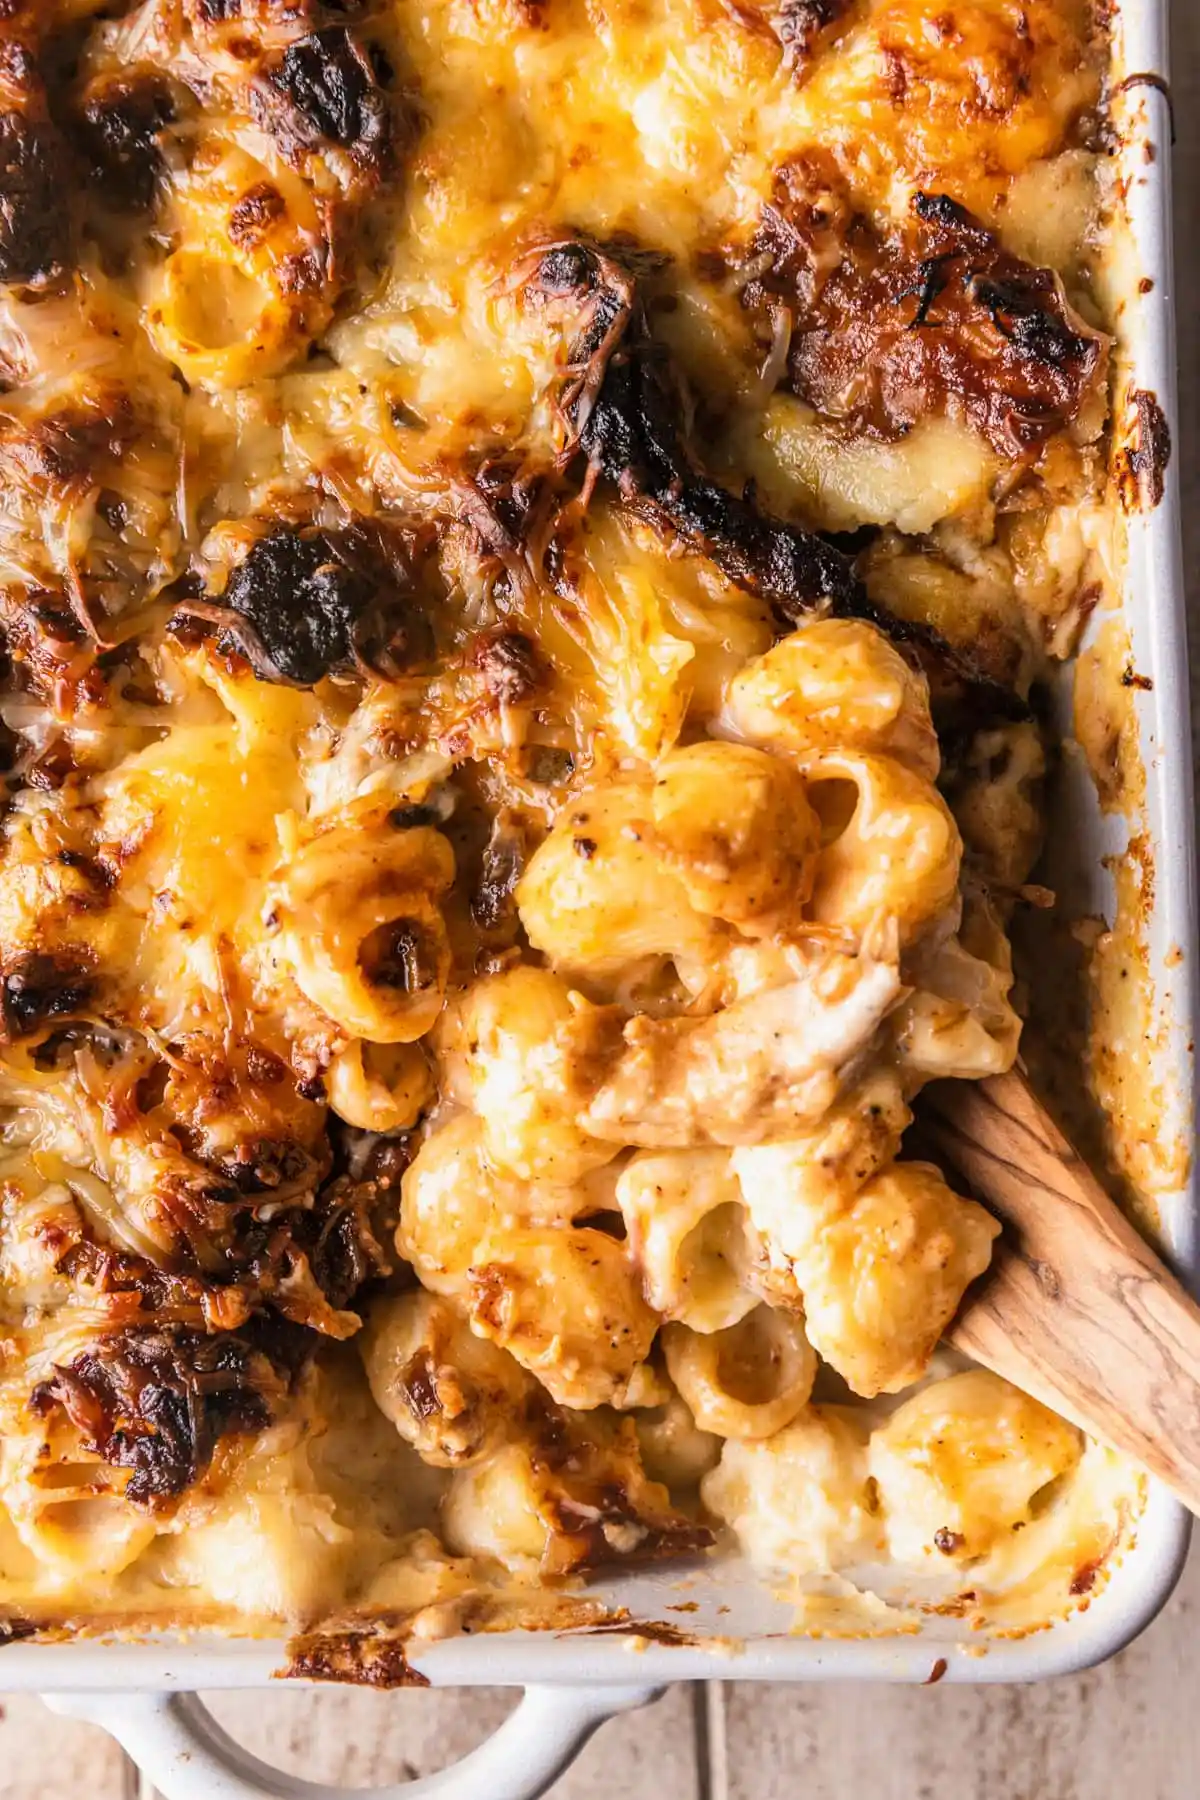 A baked macaroni and cheese dish in a white casserole has a golden-brown cheese crust, accompanied by a wooden spoon.